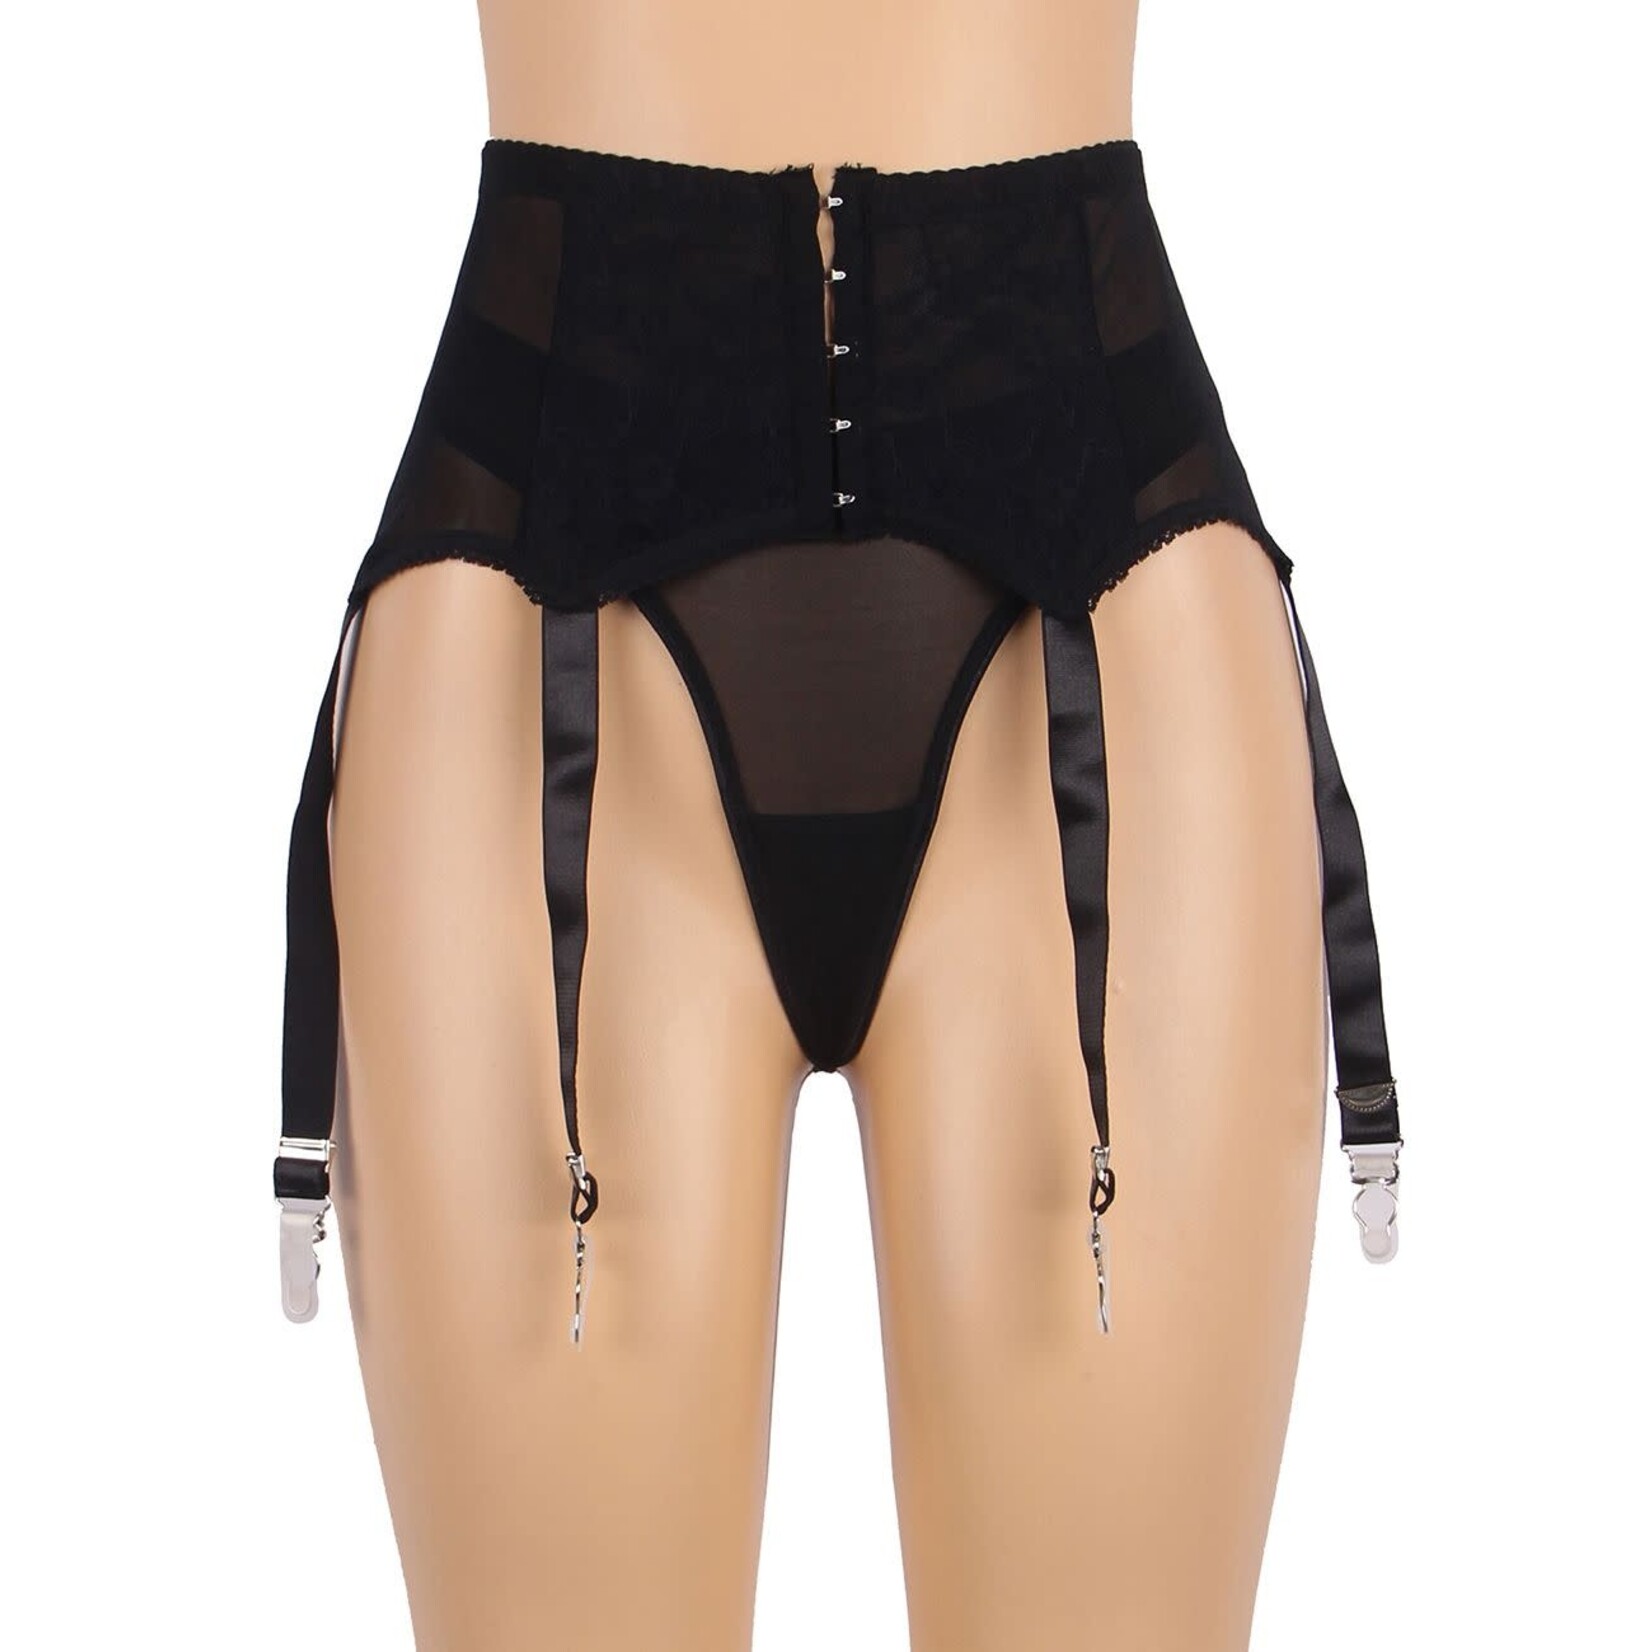 OH YEAH! -  BLACK SEXY LACE GARTER FIVE HOOK AND EYE PANTY XL-2XL